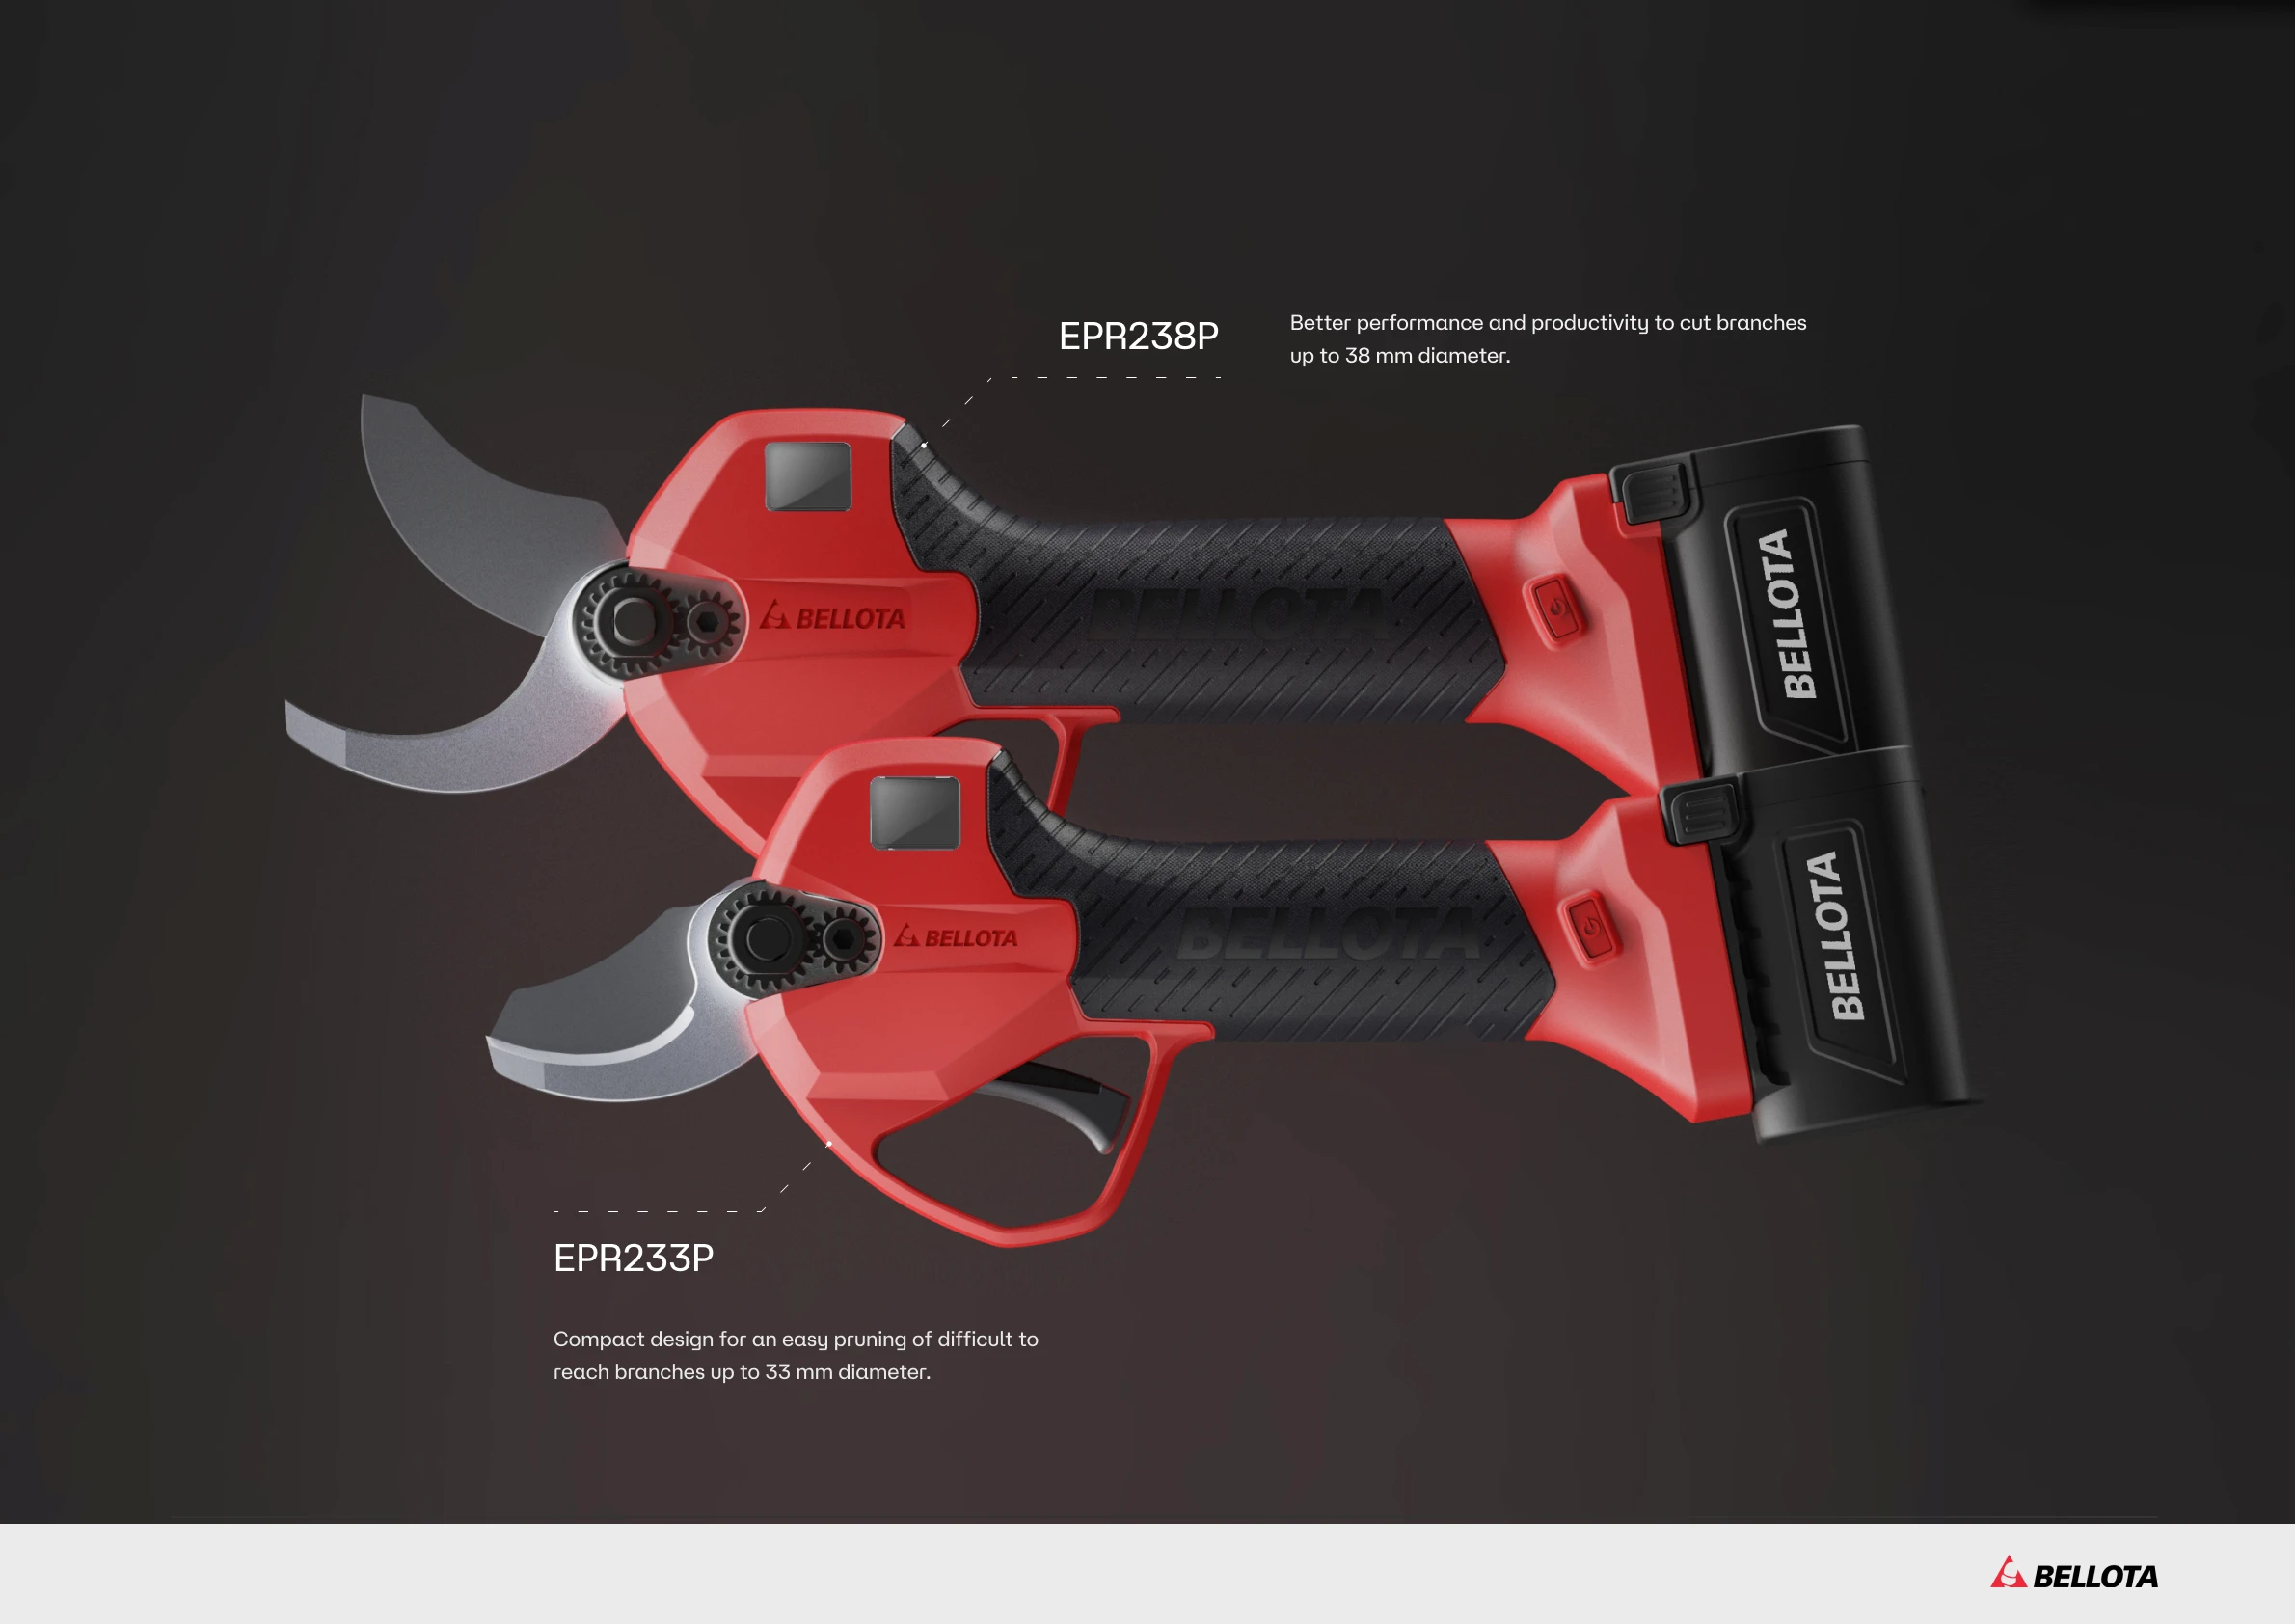 EPR238P Better performance and productivity to cut branches up to 38 mm diameter. EPR233P Compact design for an easy pruning of difficult to reach branches up to 33 mm diameter